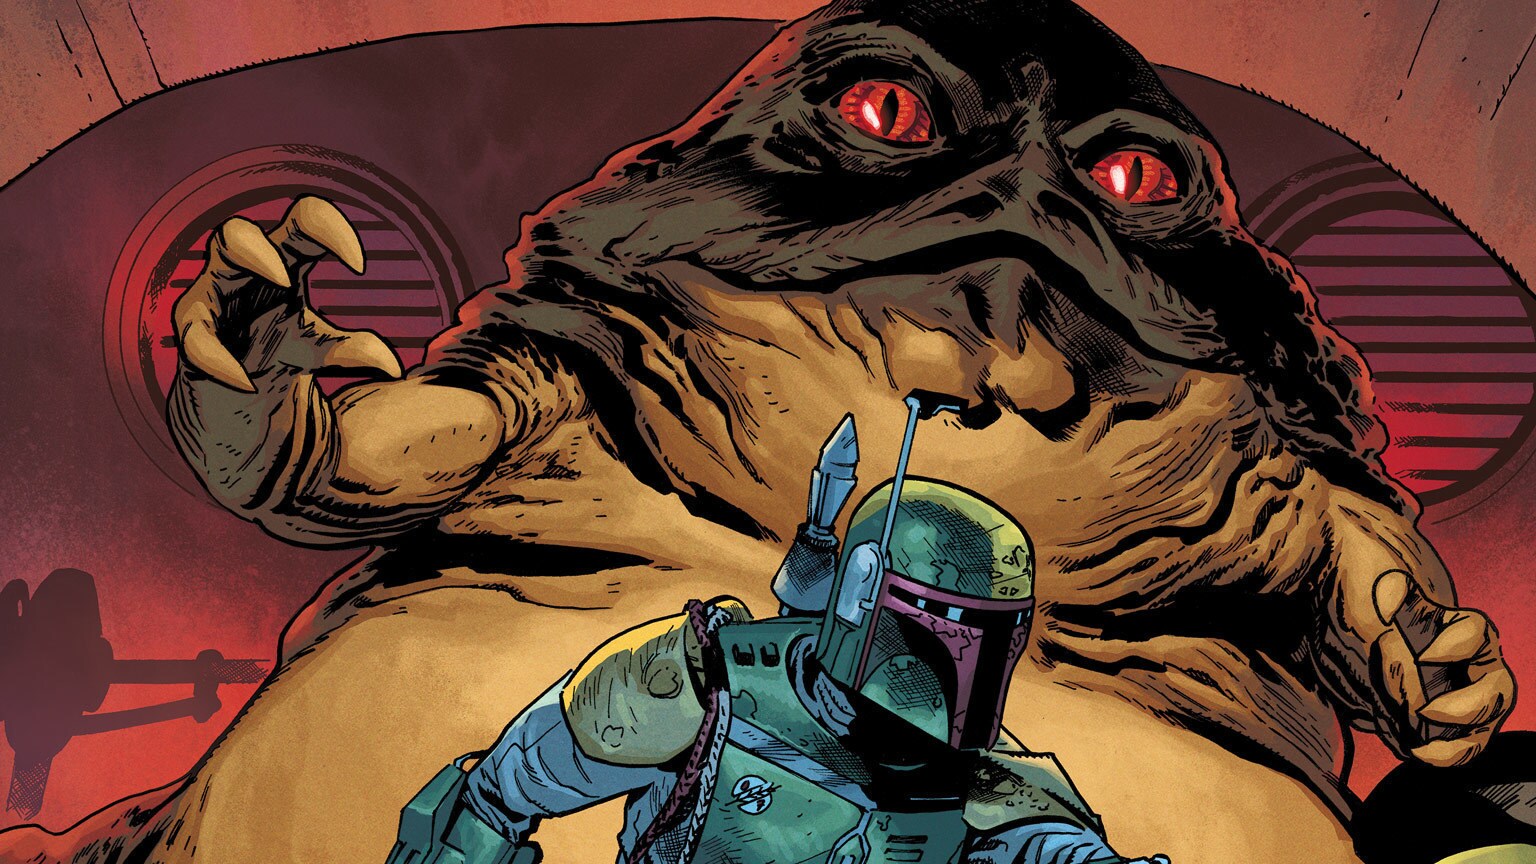 Deva Lompop Joins the Hunt for Han Solo in Marvel’s Star Wars: War of the Bounty Hunters: Jabba the Hutt #1 - Exclusive Preview